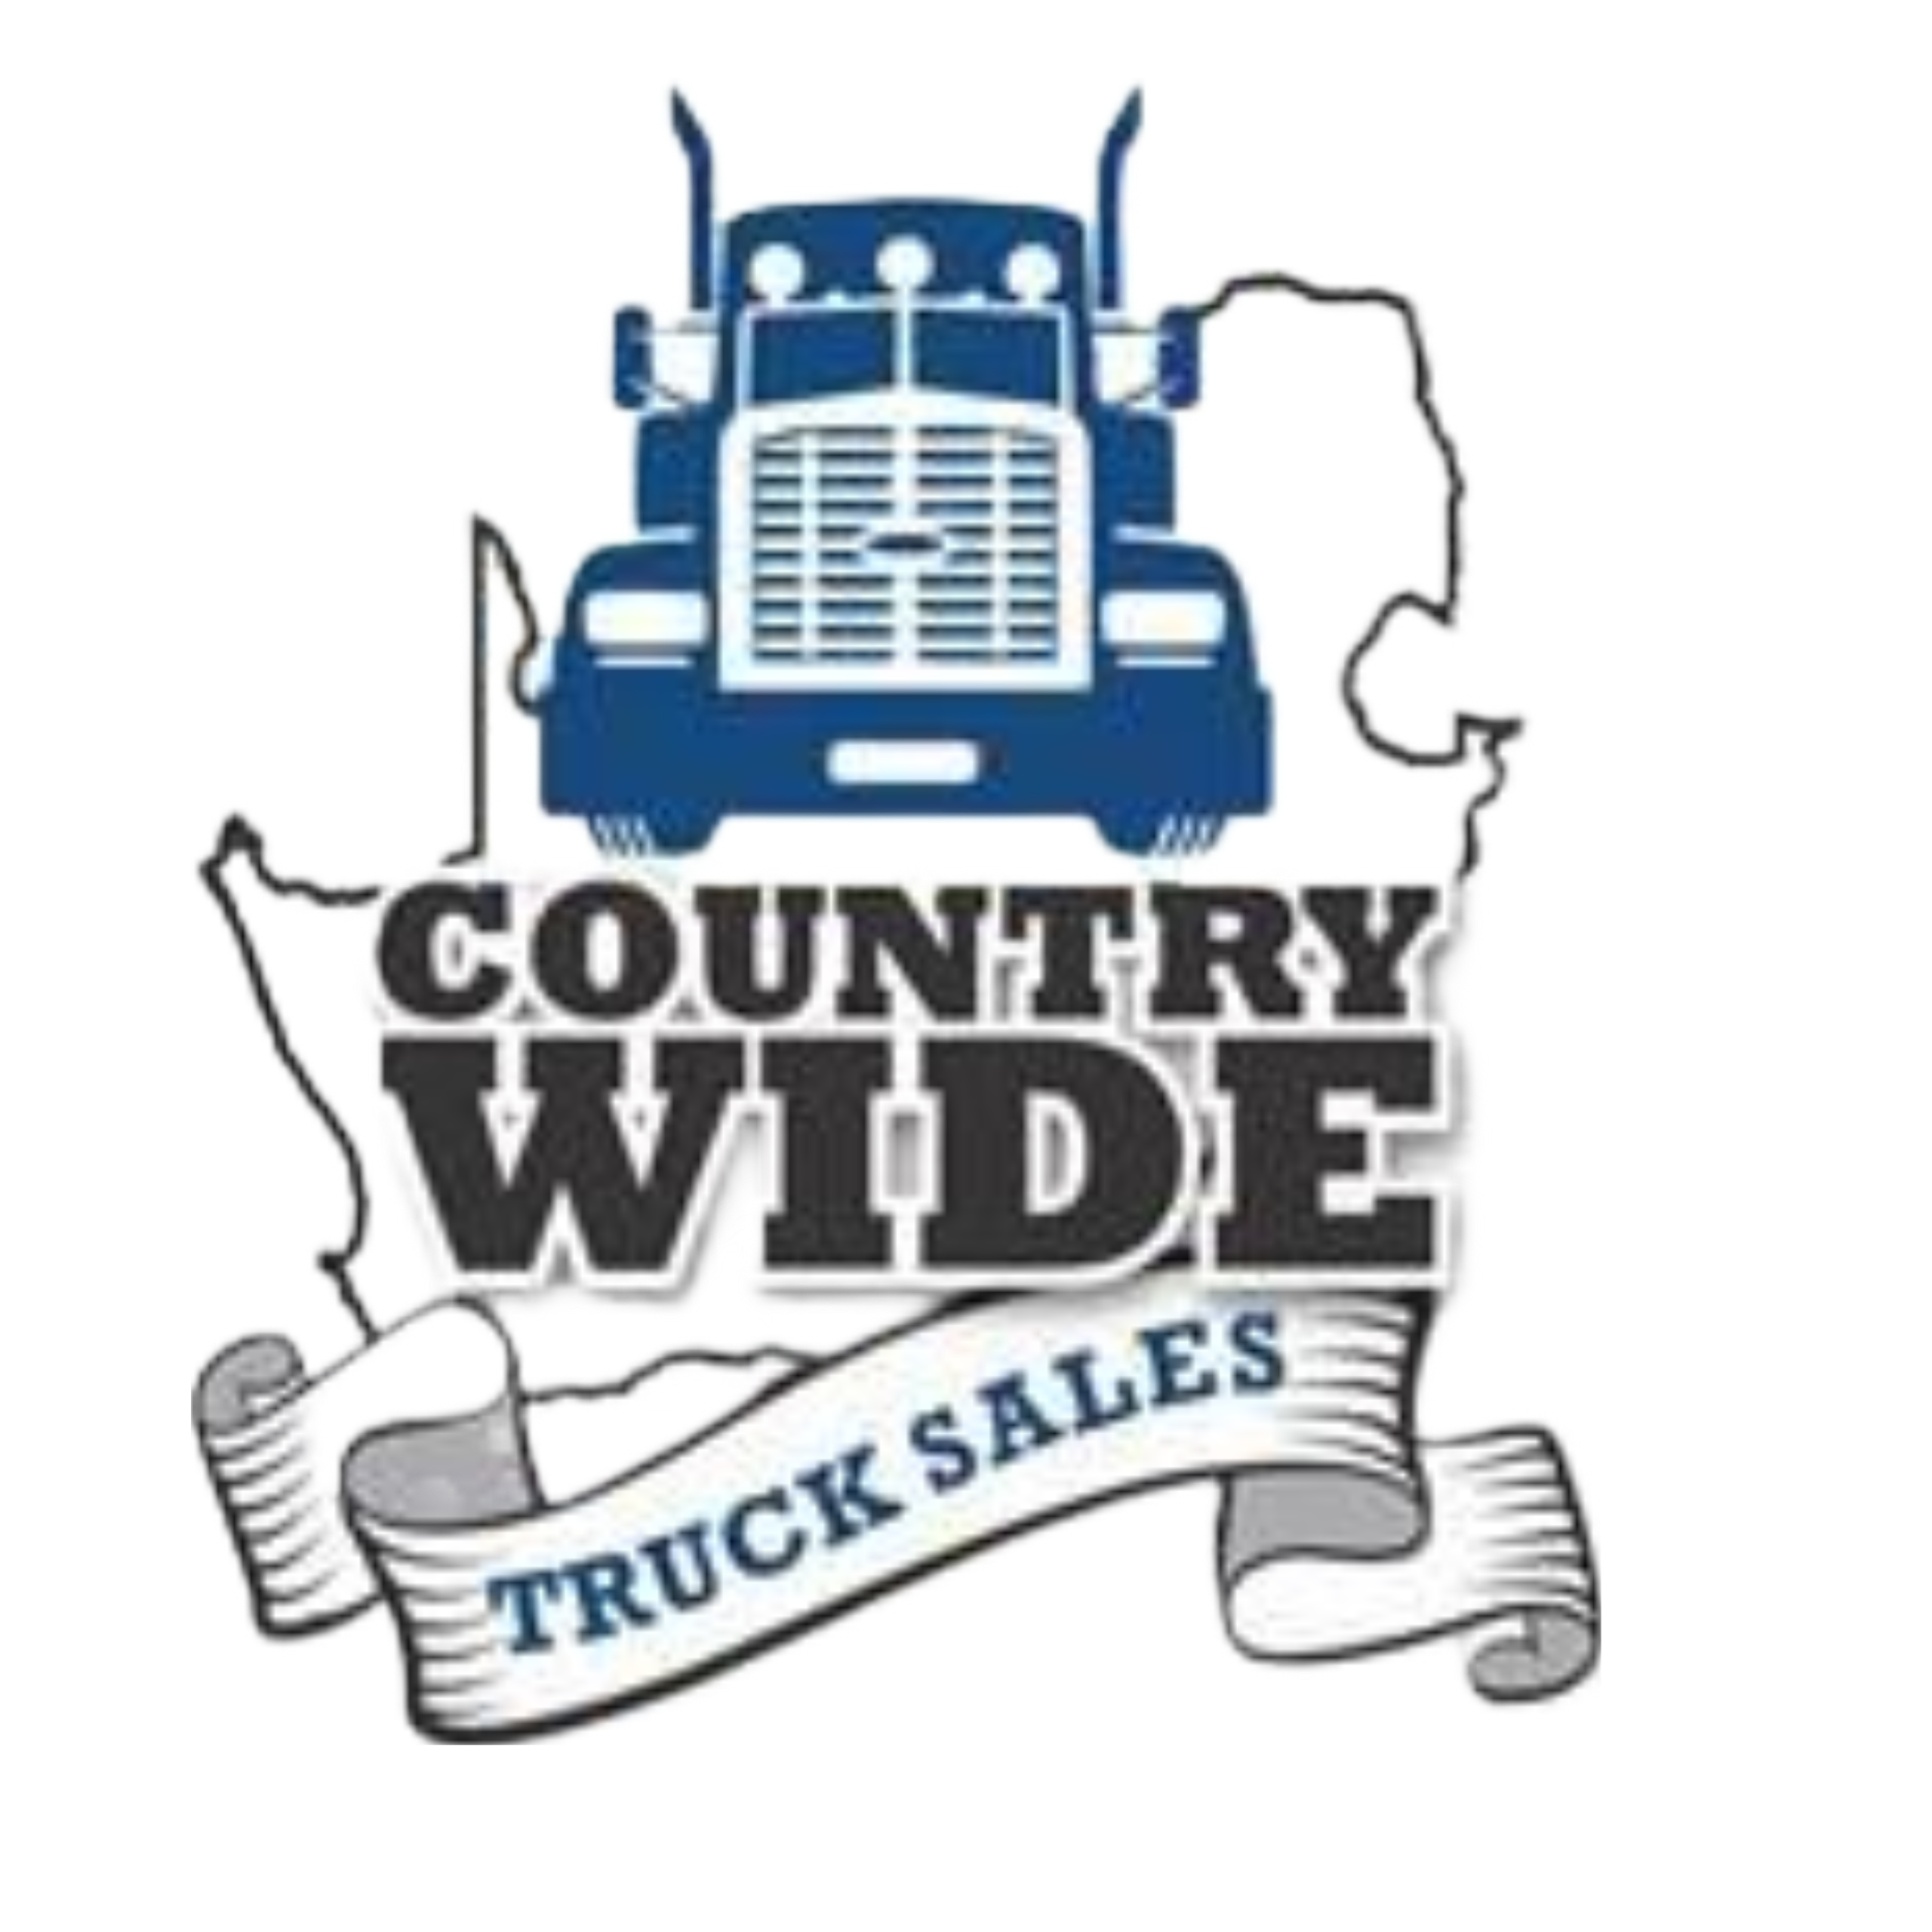 Countrywide Truck Sales